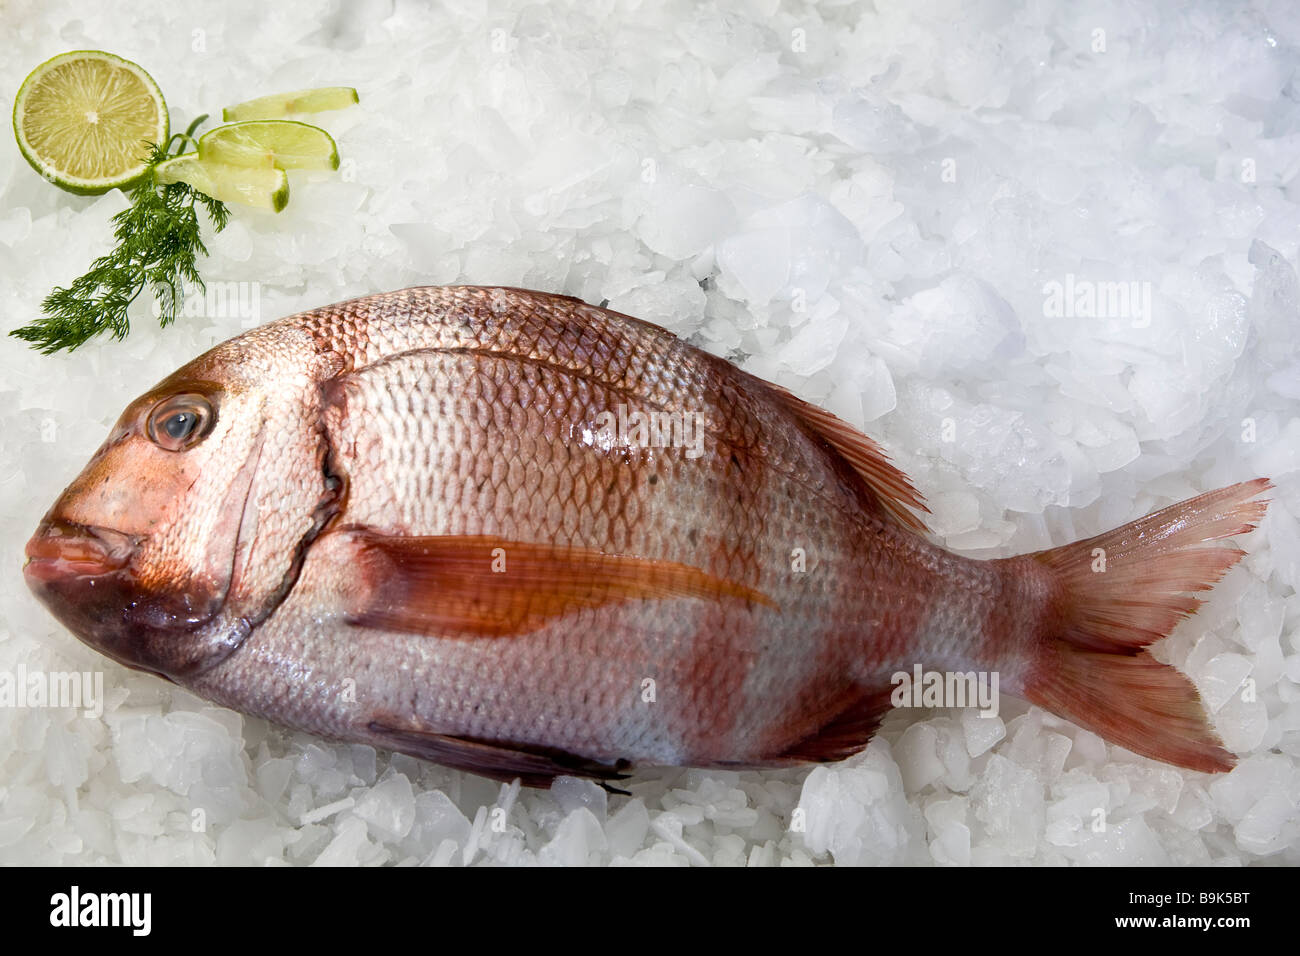 snapper on ice Stock Photo